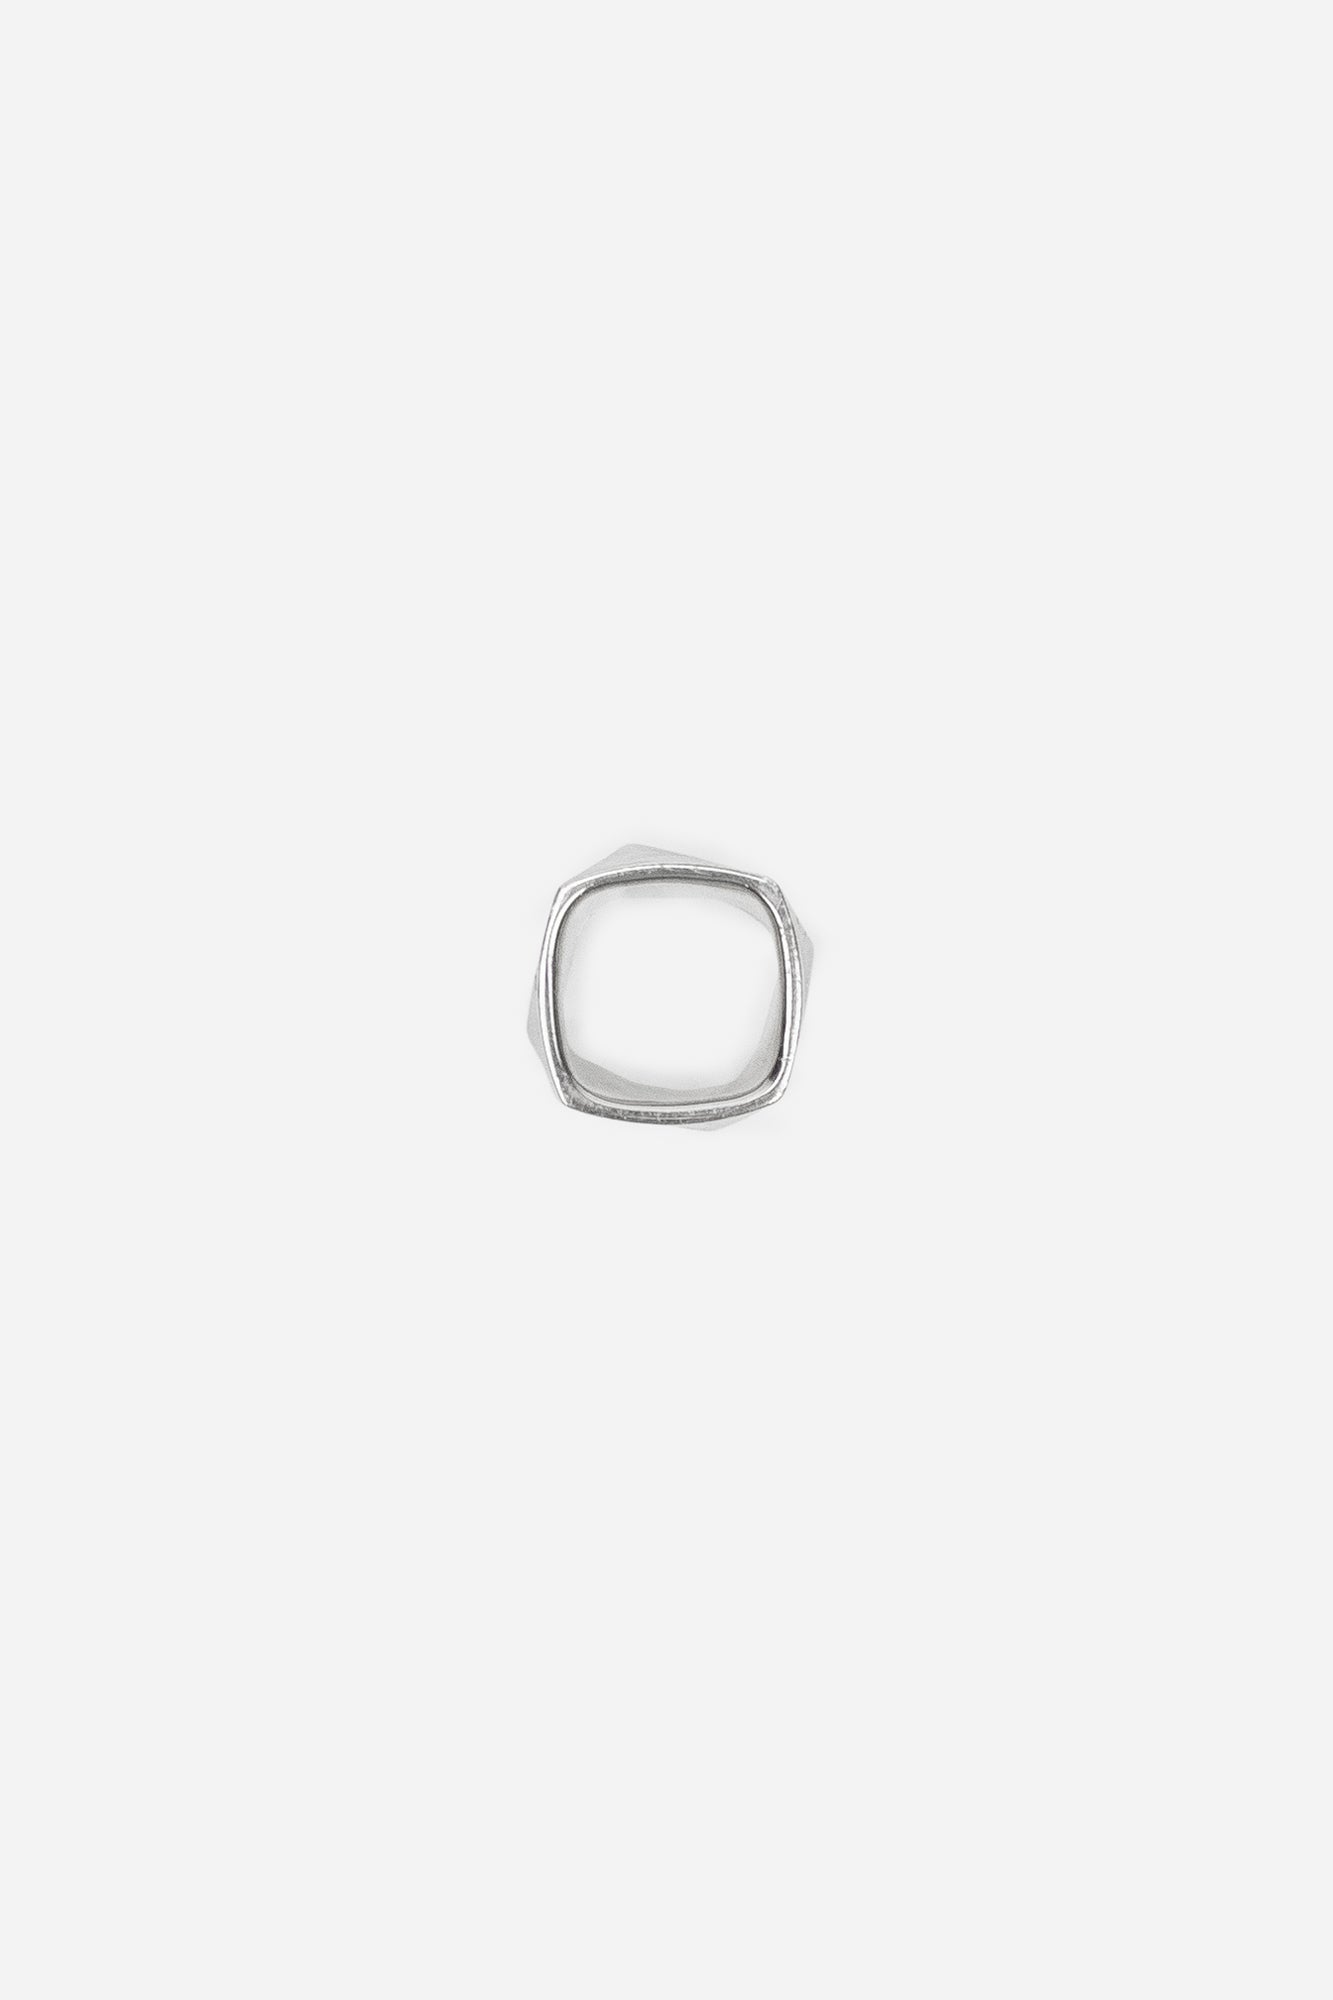 Silver Frank Gehry Torque Ring